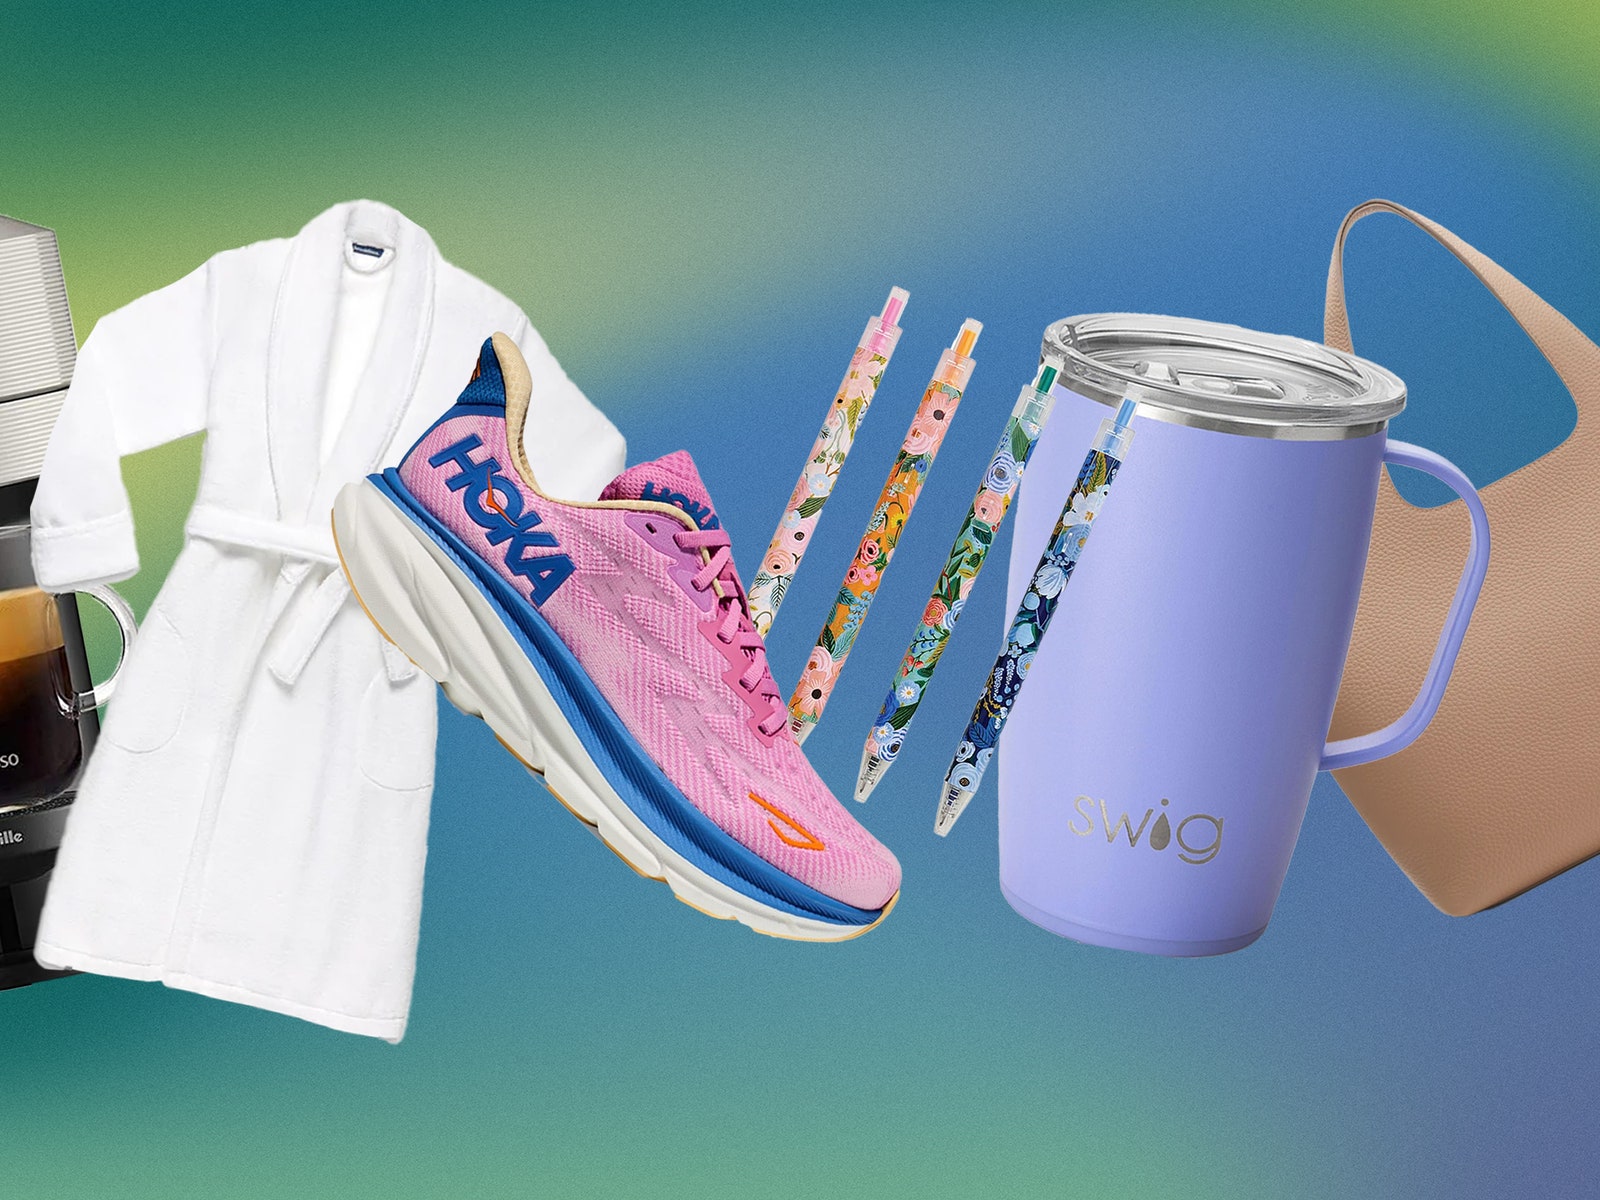 52 Gifts for Nurses Who Could Use a Little TLC